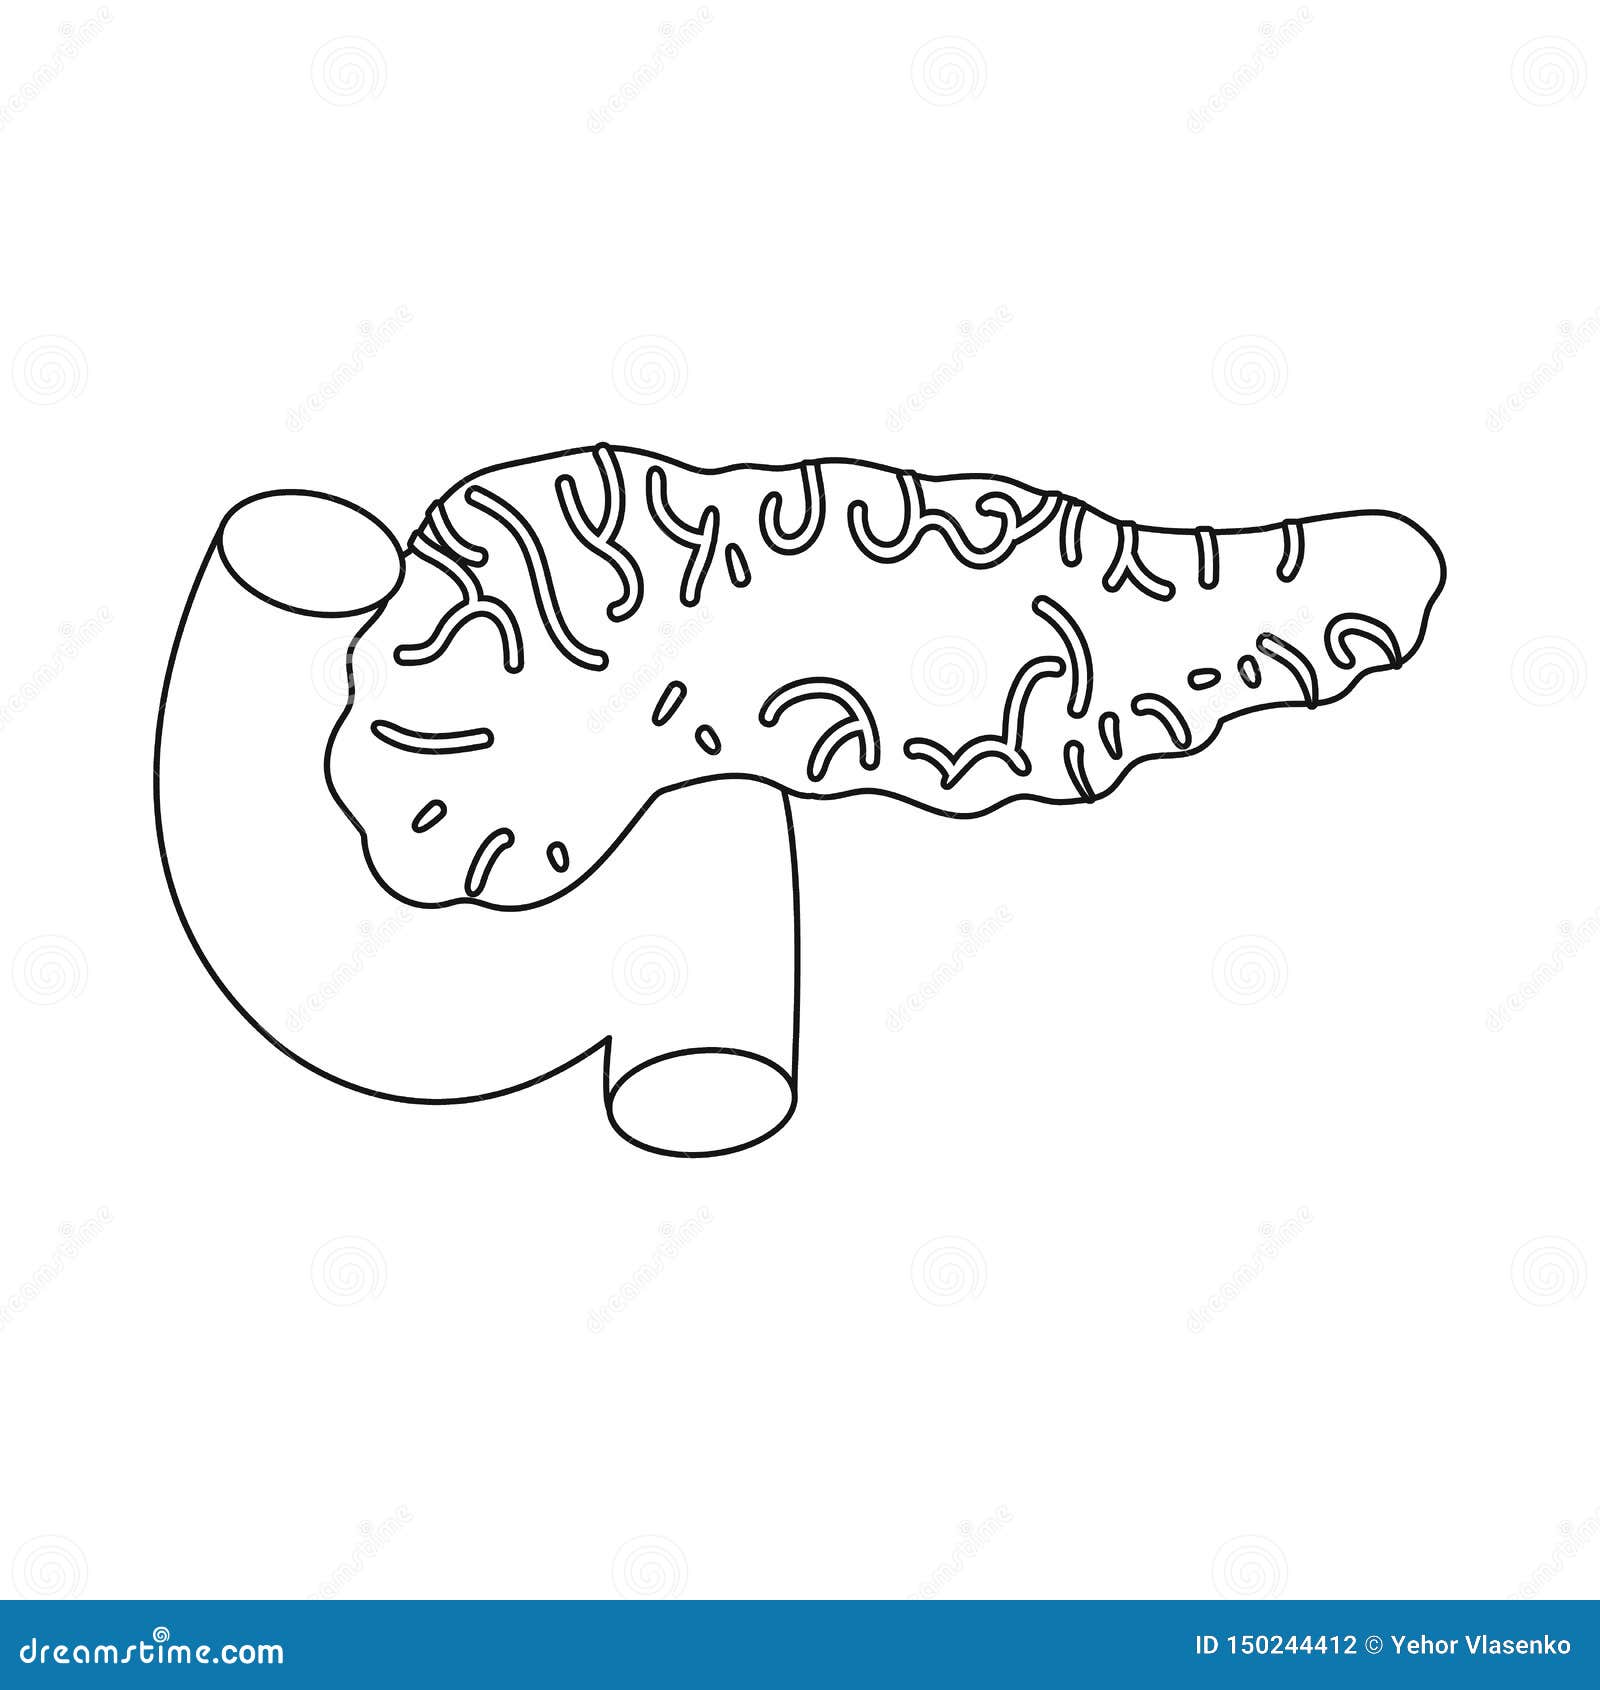 Draw neat labeled diagram of the pancreas with their associated structures.